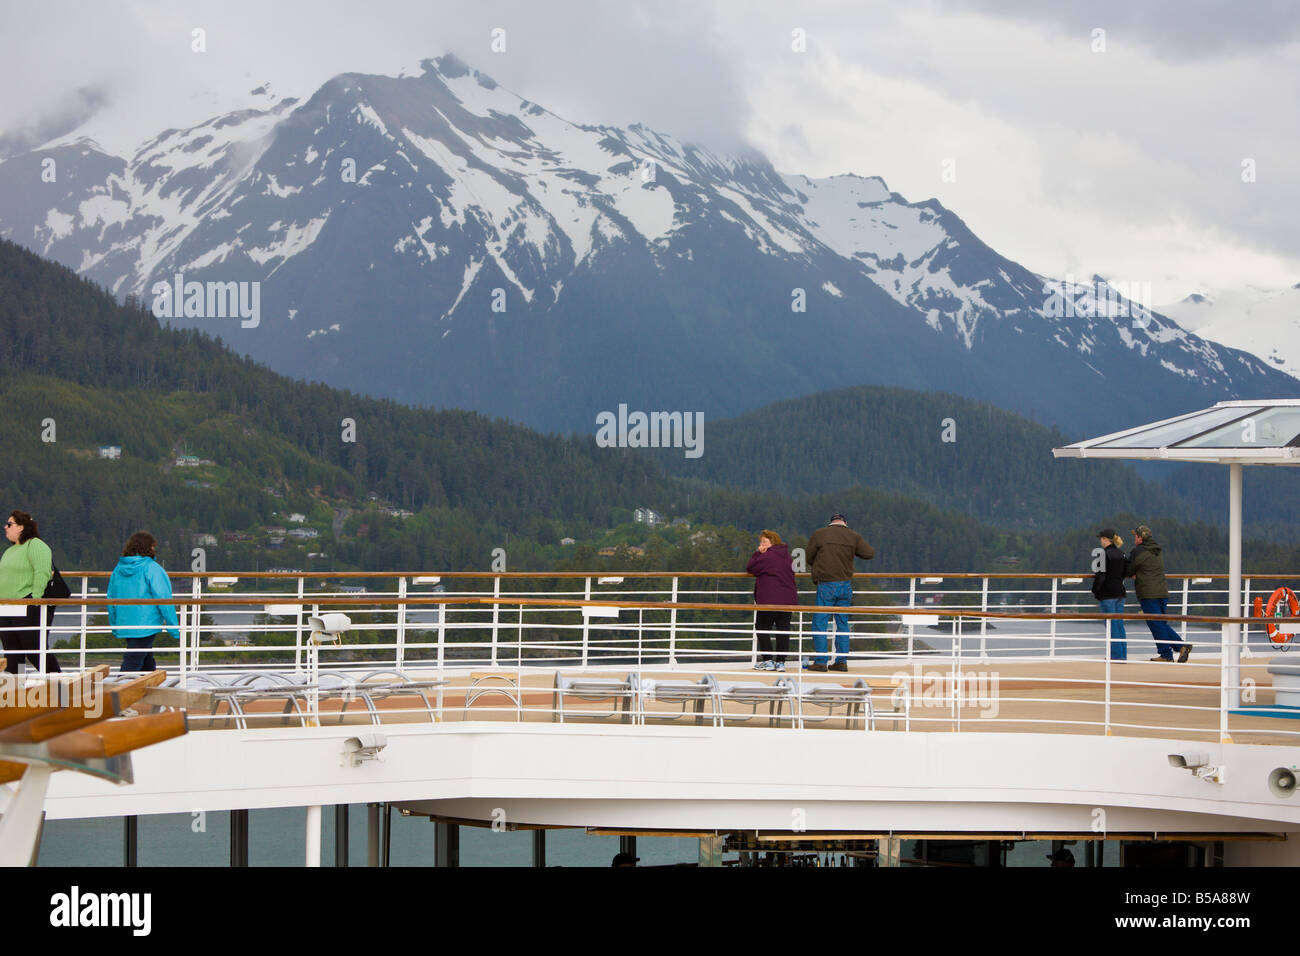 Curise ship passengers standing at ship railing looking at snow capped mountains near Sitka, Alaska Stock Photo